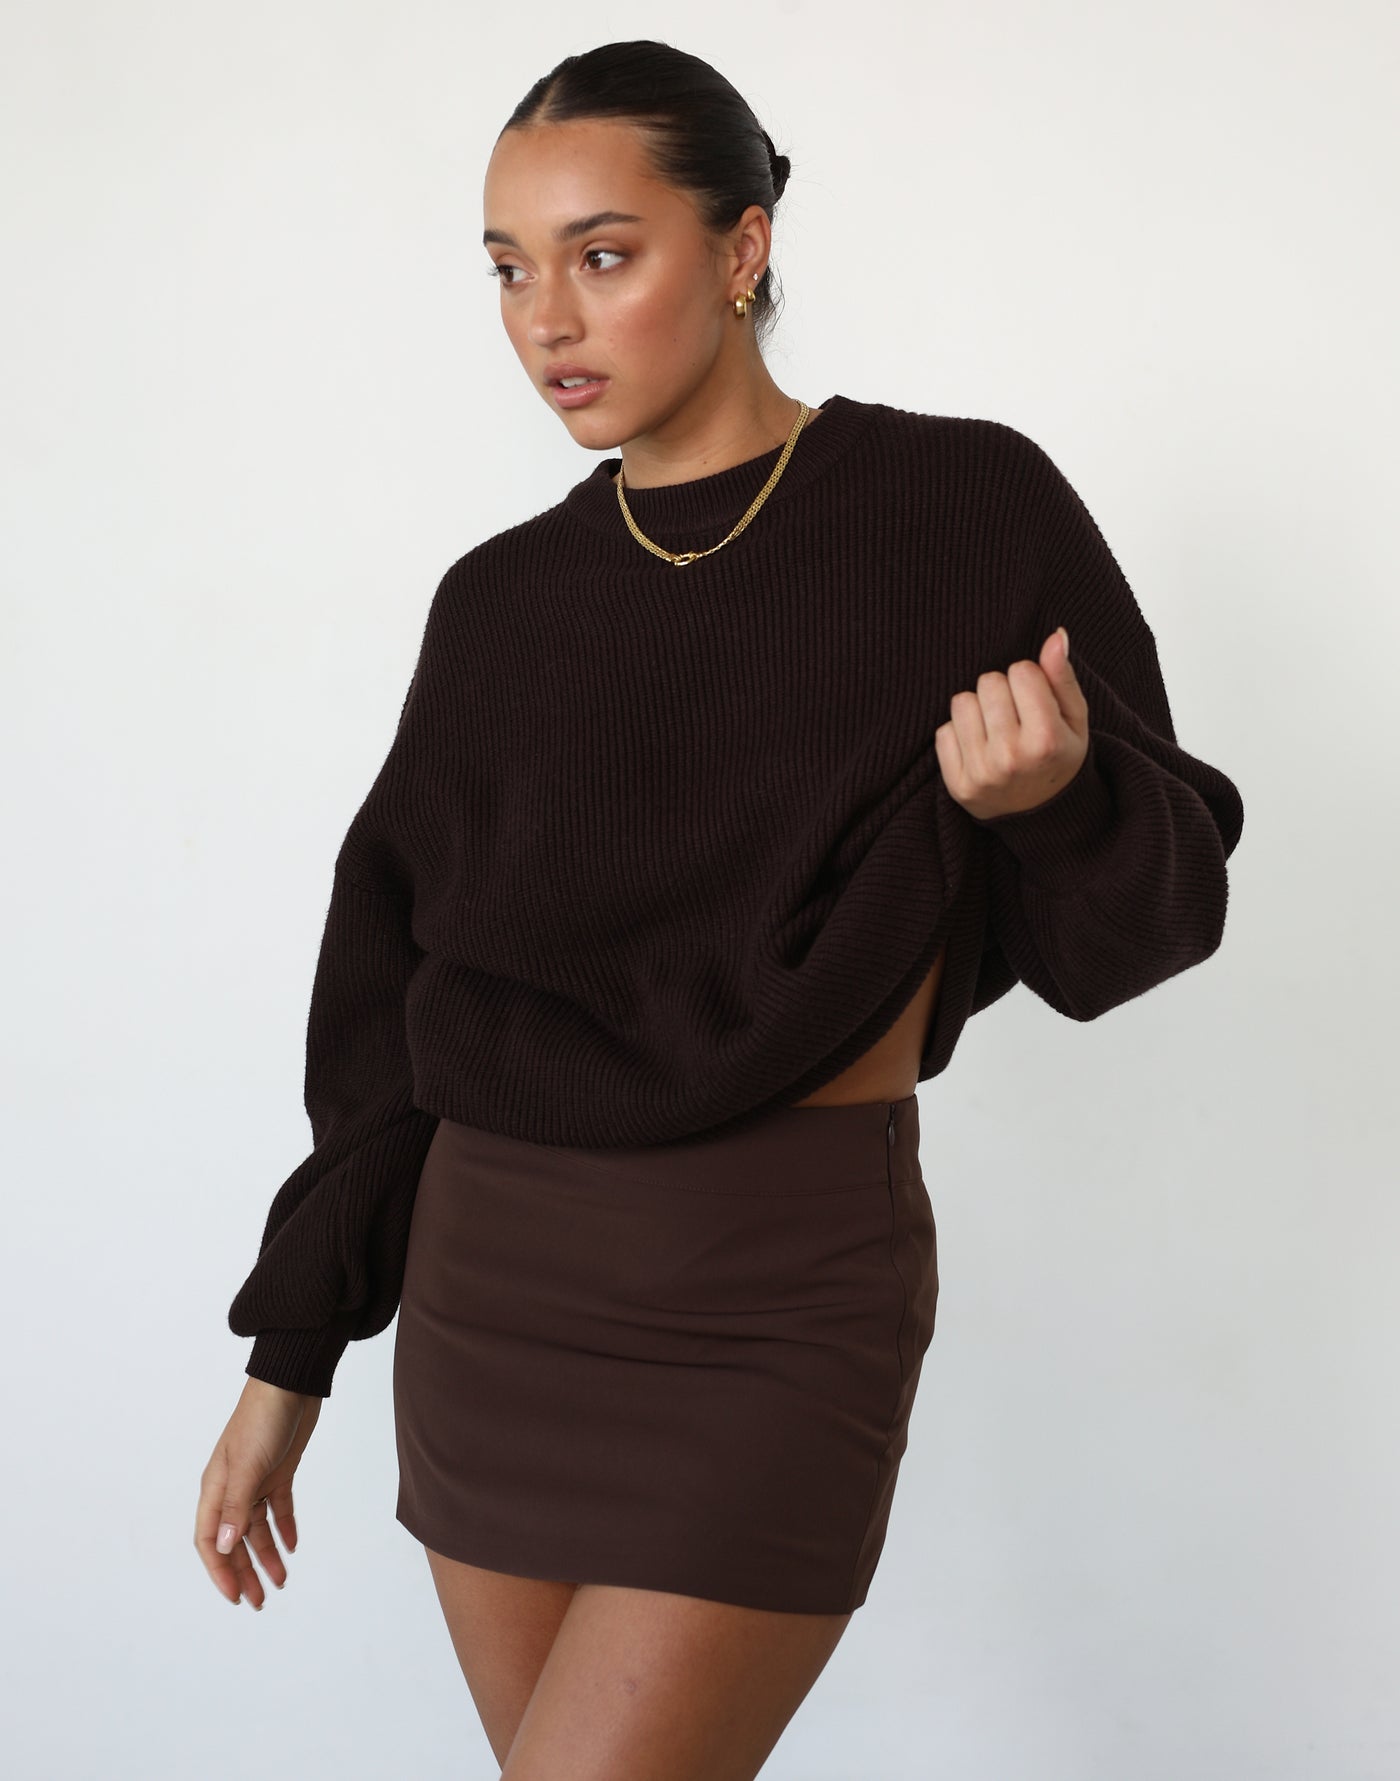 Cody Oversized Jumper (Chocolate) - Oversized Crew Neck Brown Knit Jumper - Women's Top - Charcoal Clothing